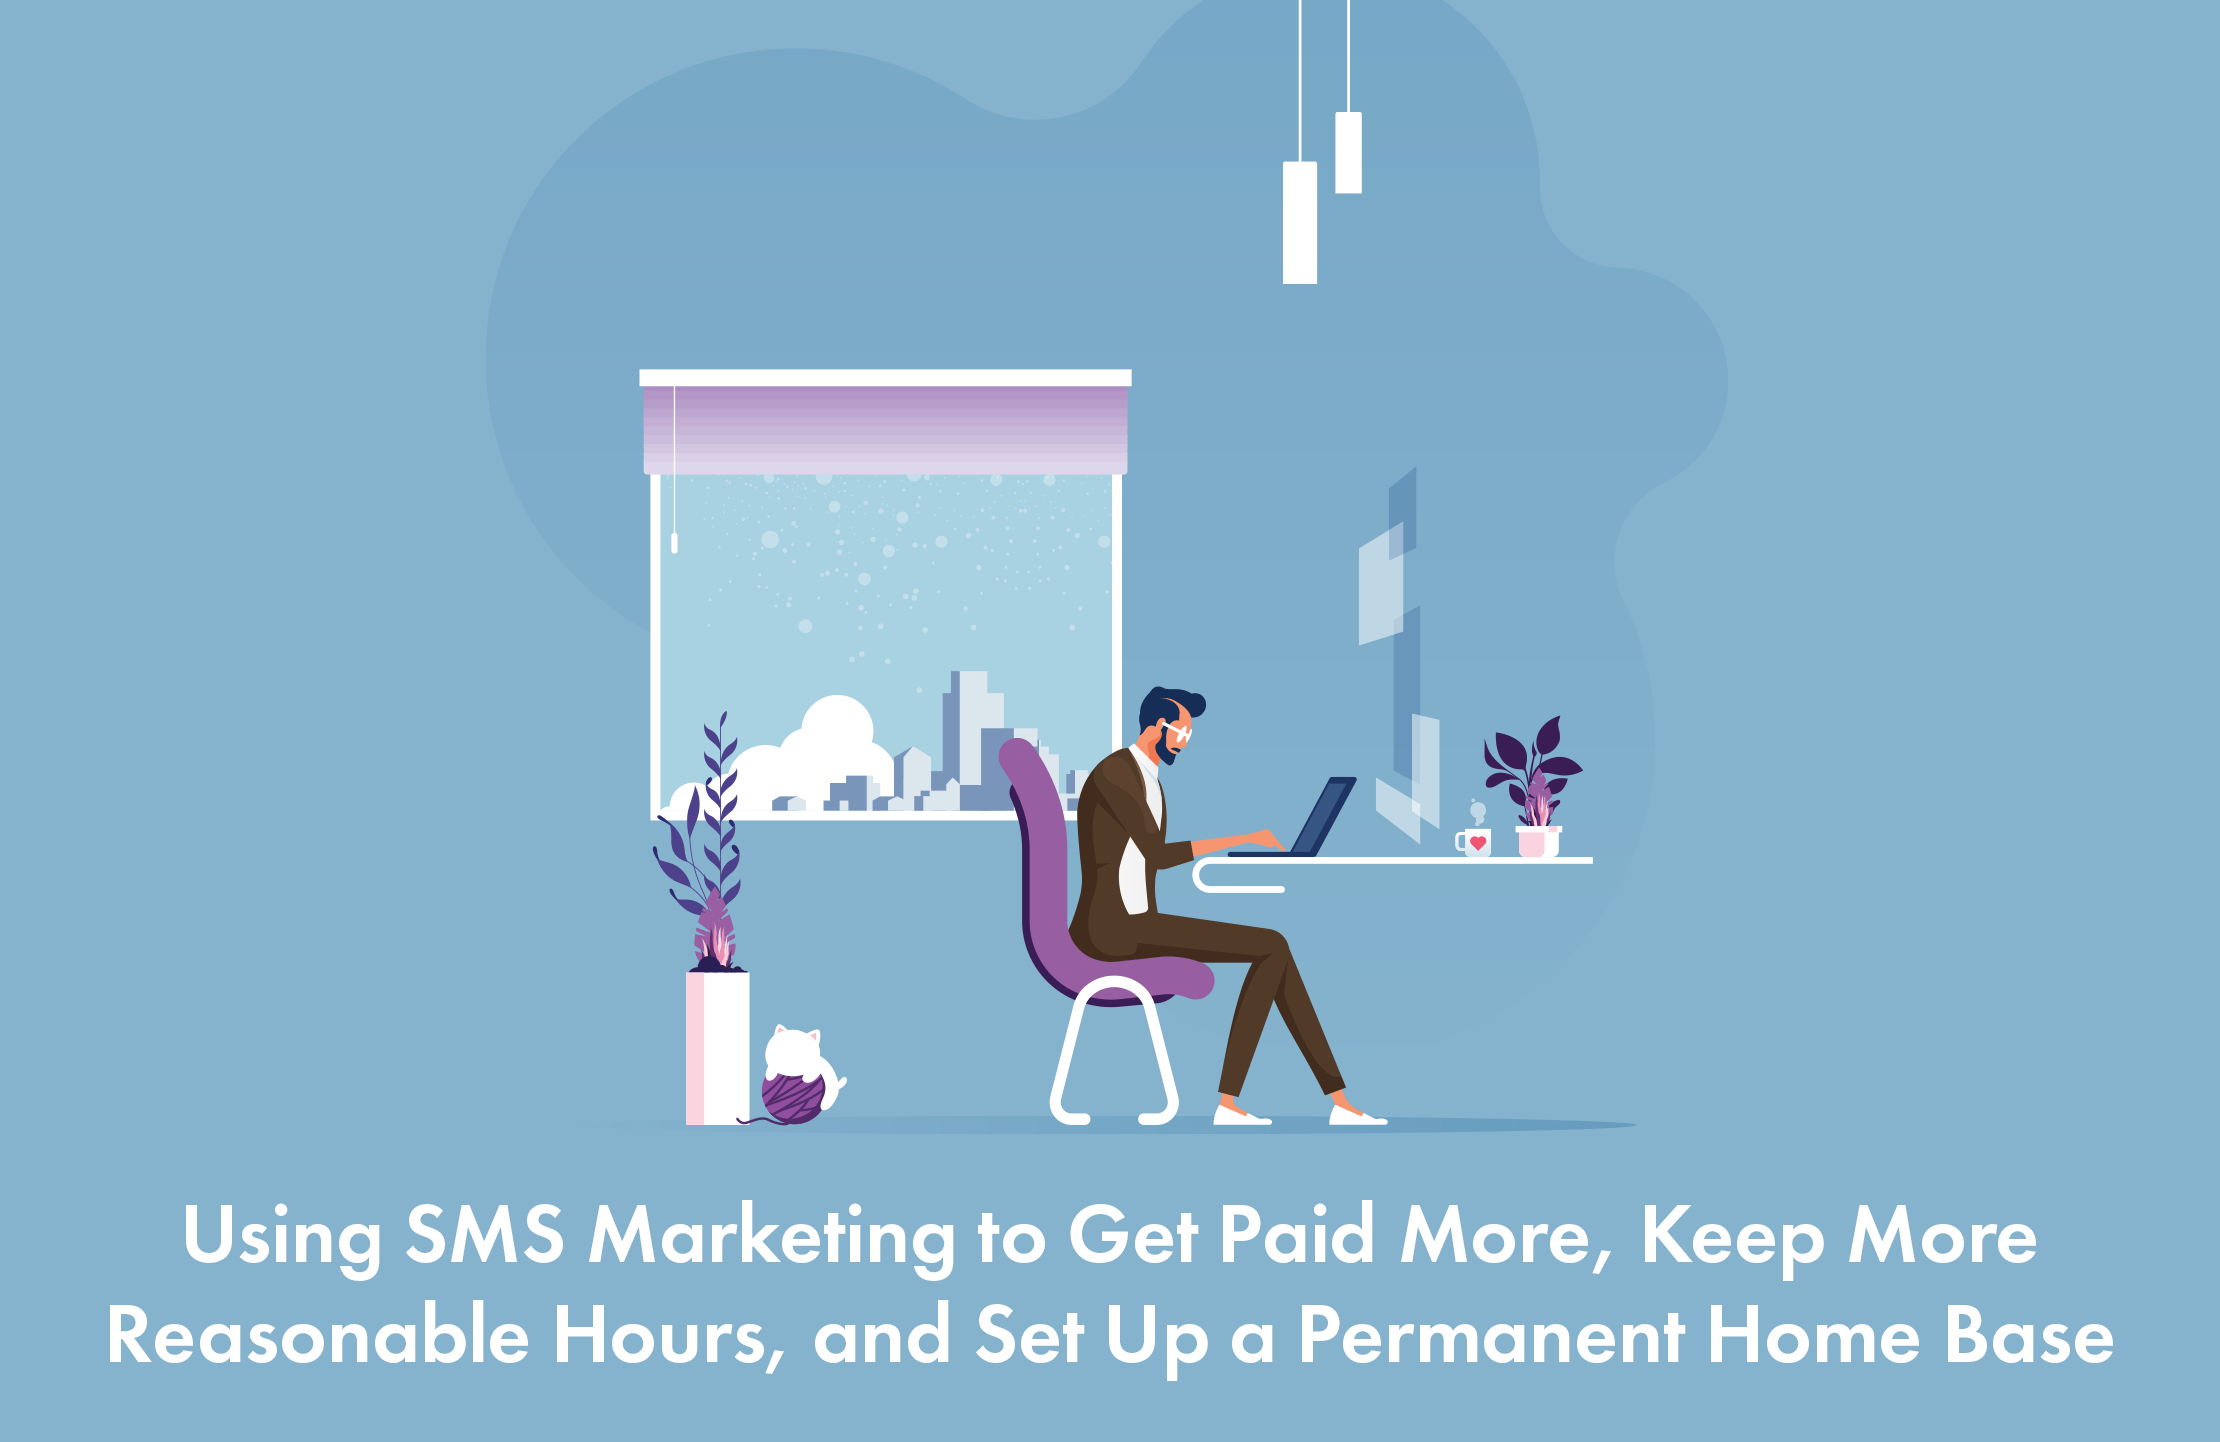 Pay more using SMS marketing, keep more reasonable hours and set up a permanent home base